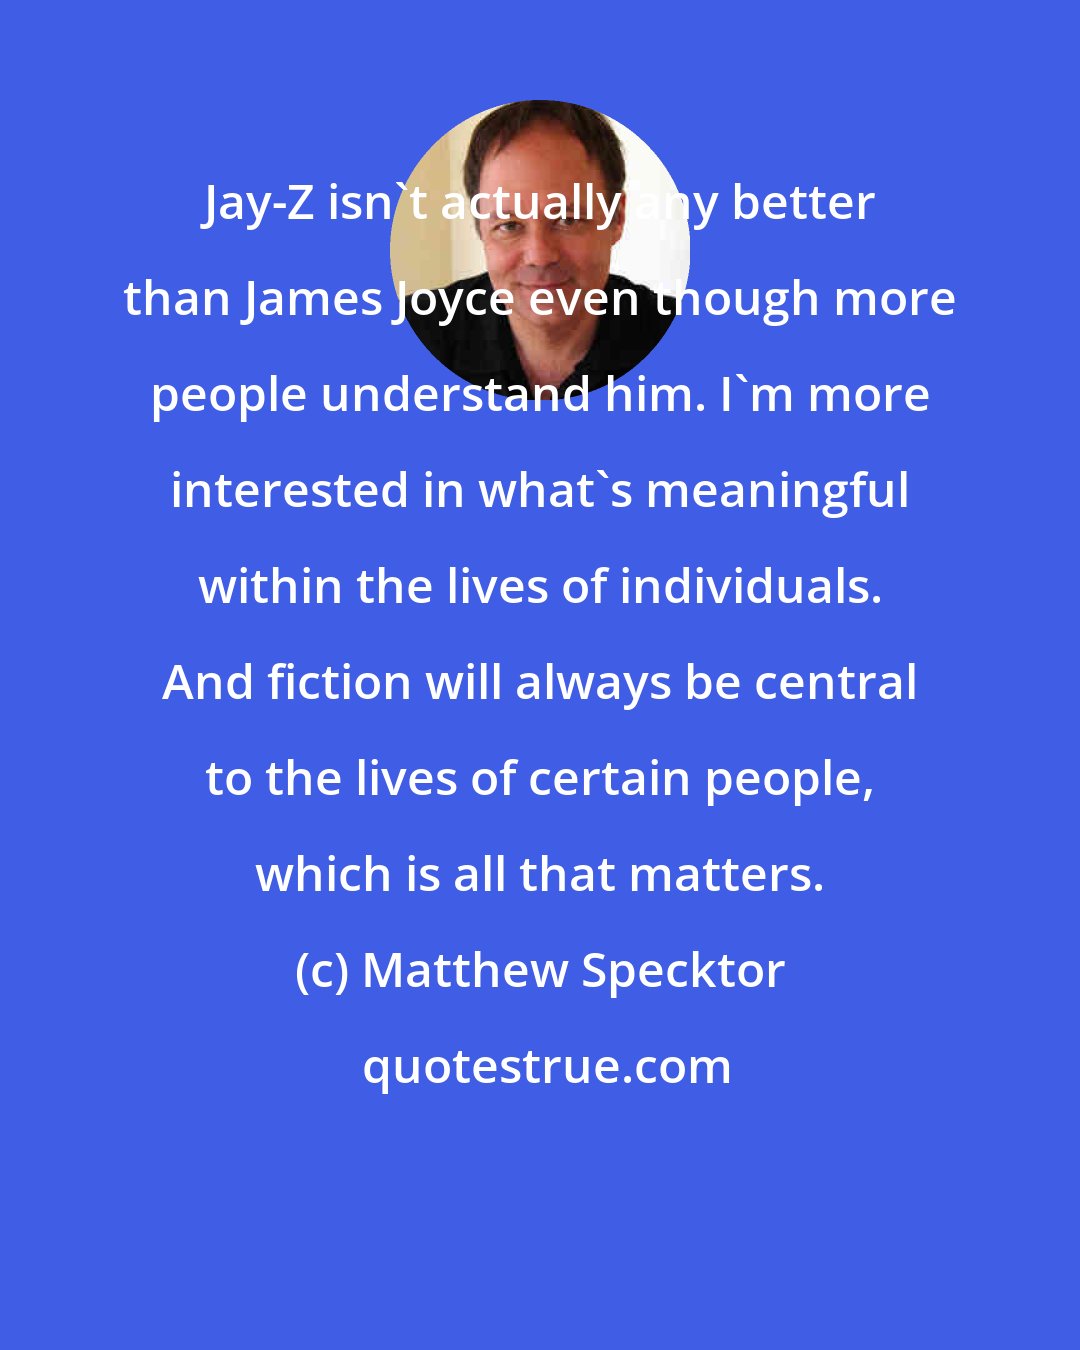 Matthew Specktor: Jay-Z isn't actually any better than James Joyce even though more people understand him. I'm more interested in what's meaningful within the lives of individuals. And fiction will always be central to the lives of certain people, which is all that matters.